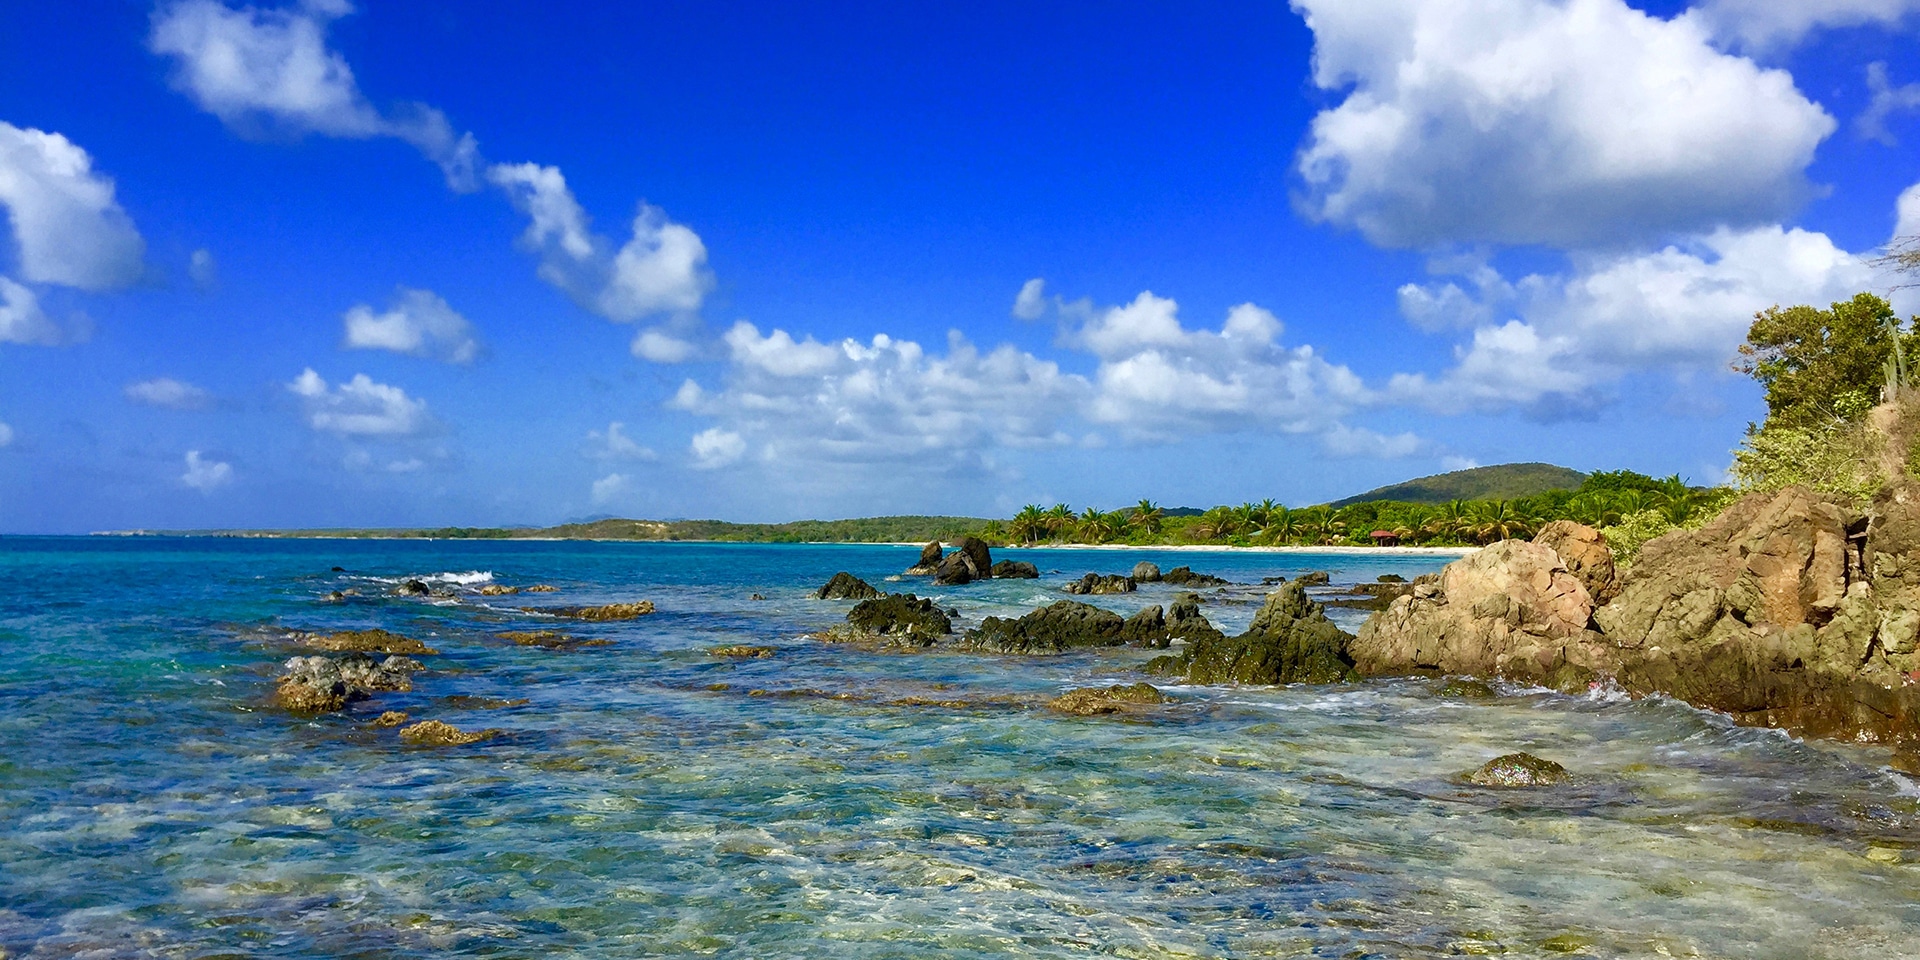 excursion to vieques